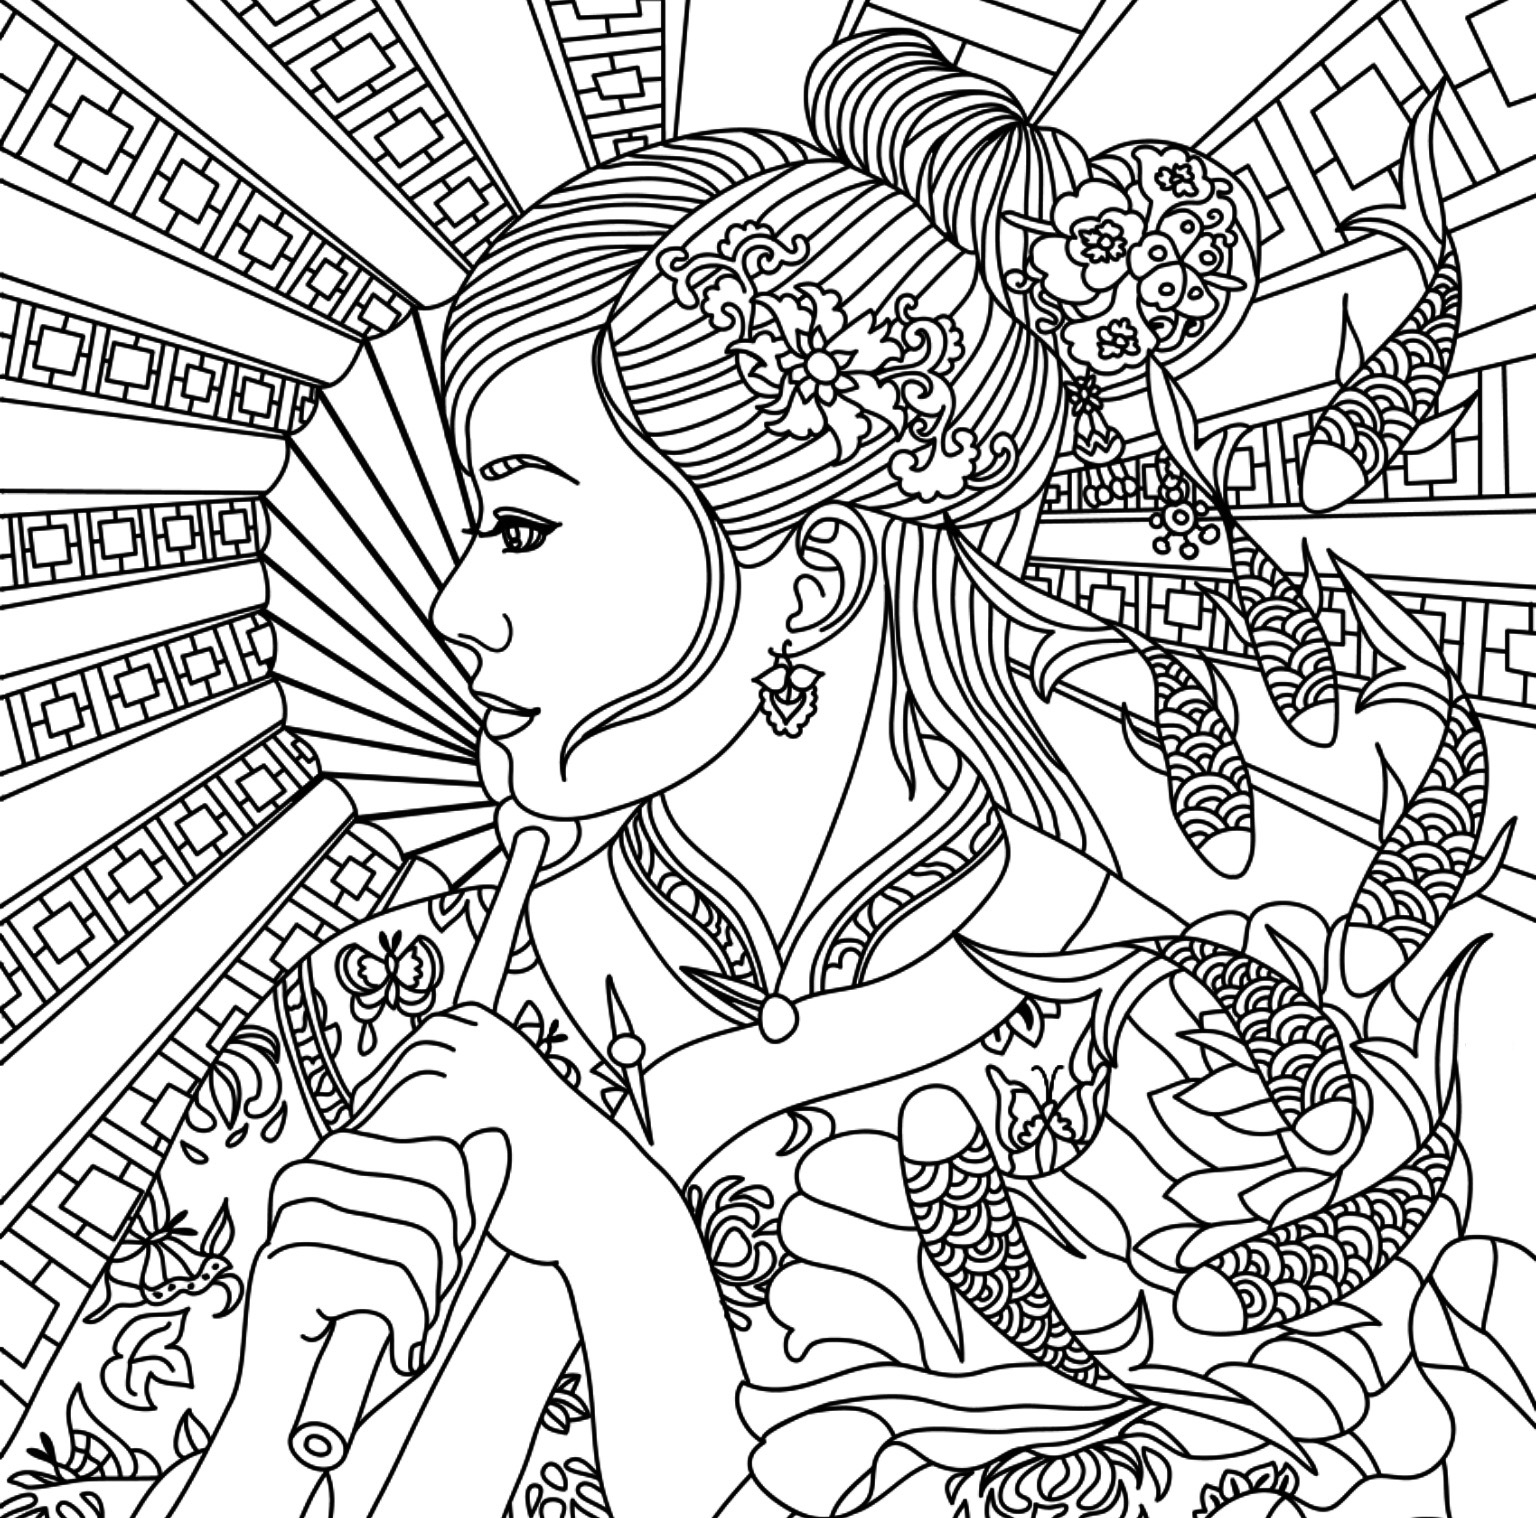 Once Upon A Time Coloring Pages at Free printable